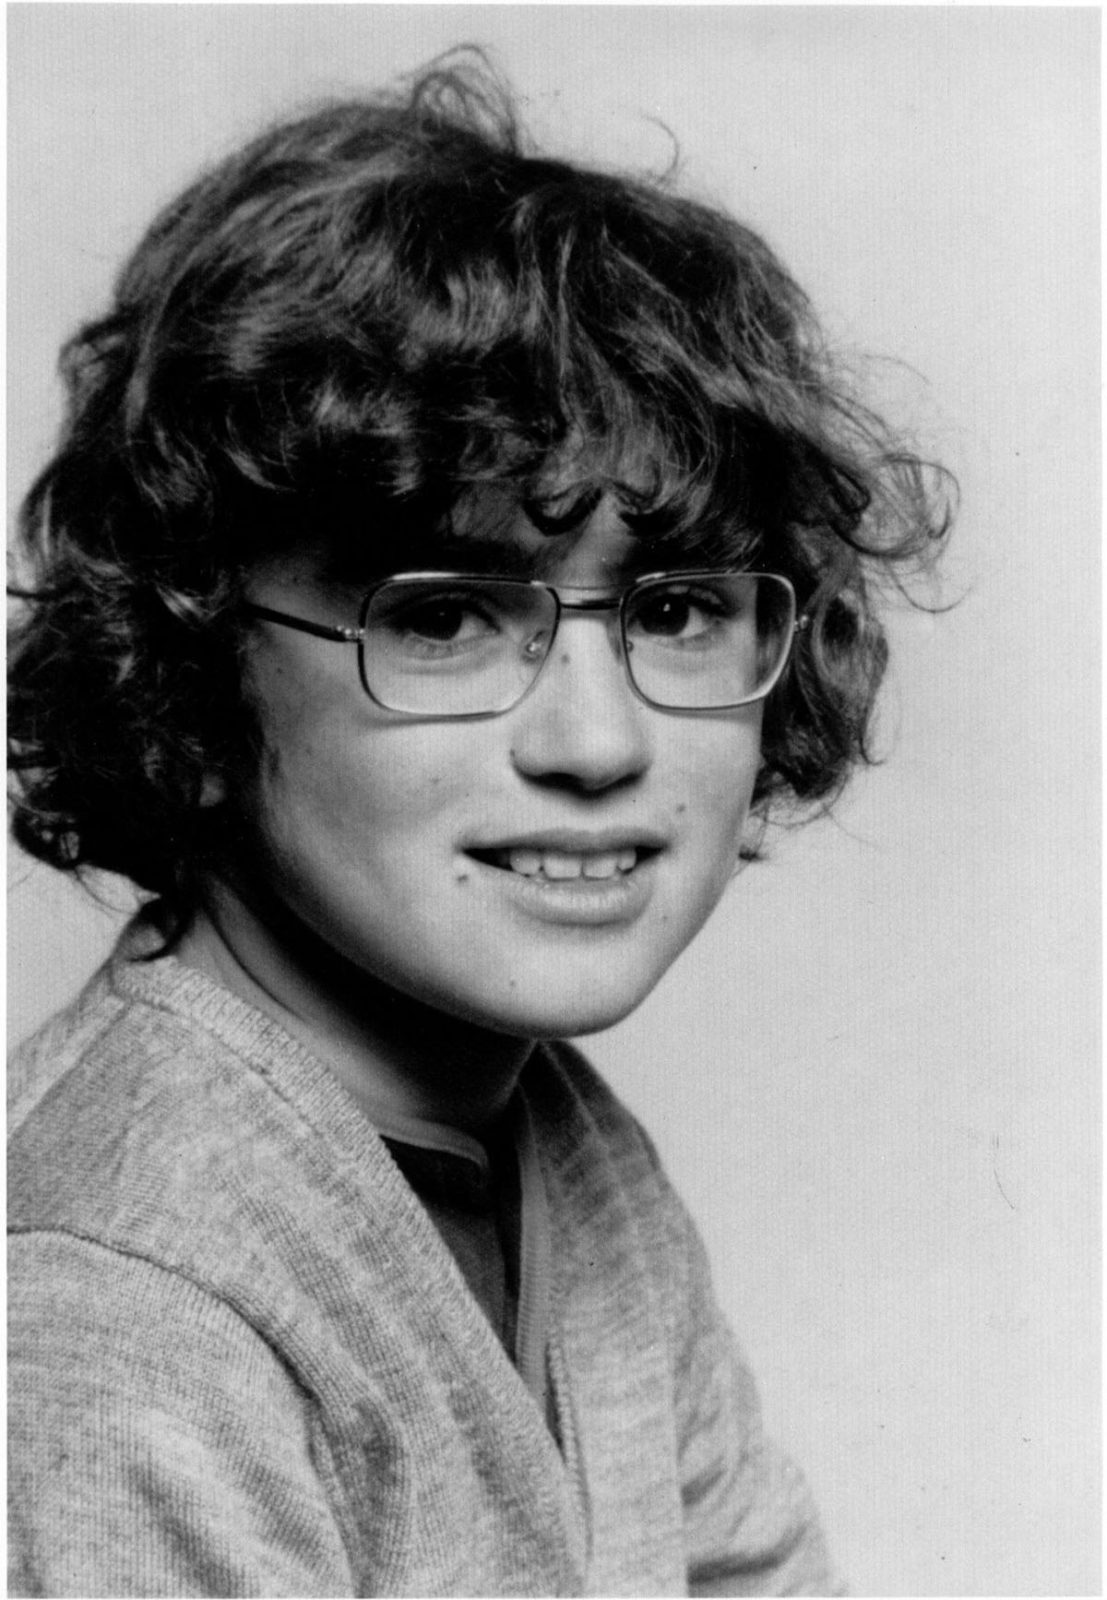 George Michael in his youth